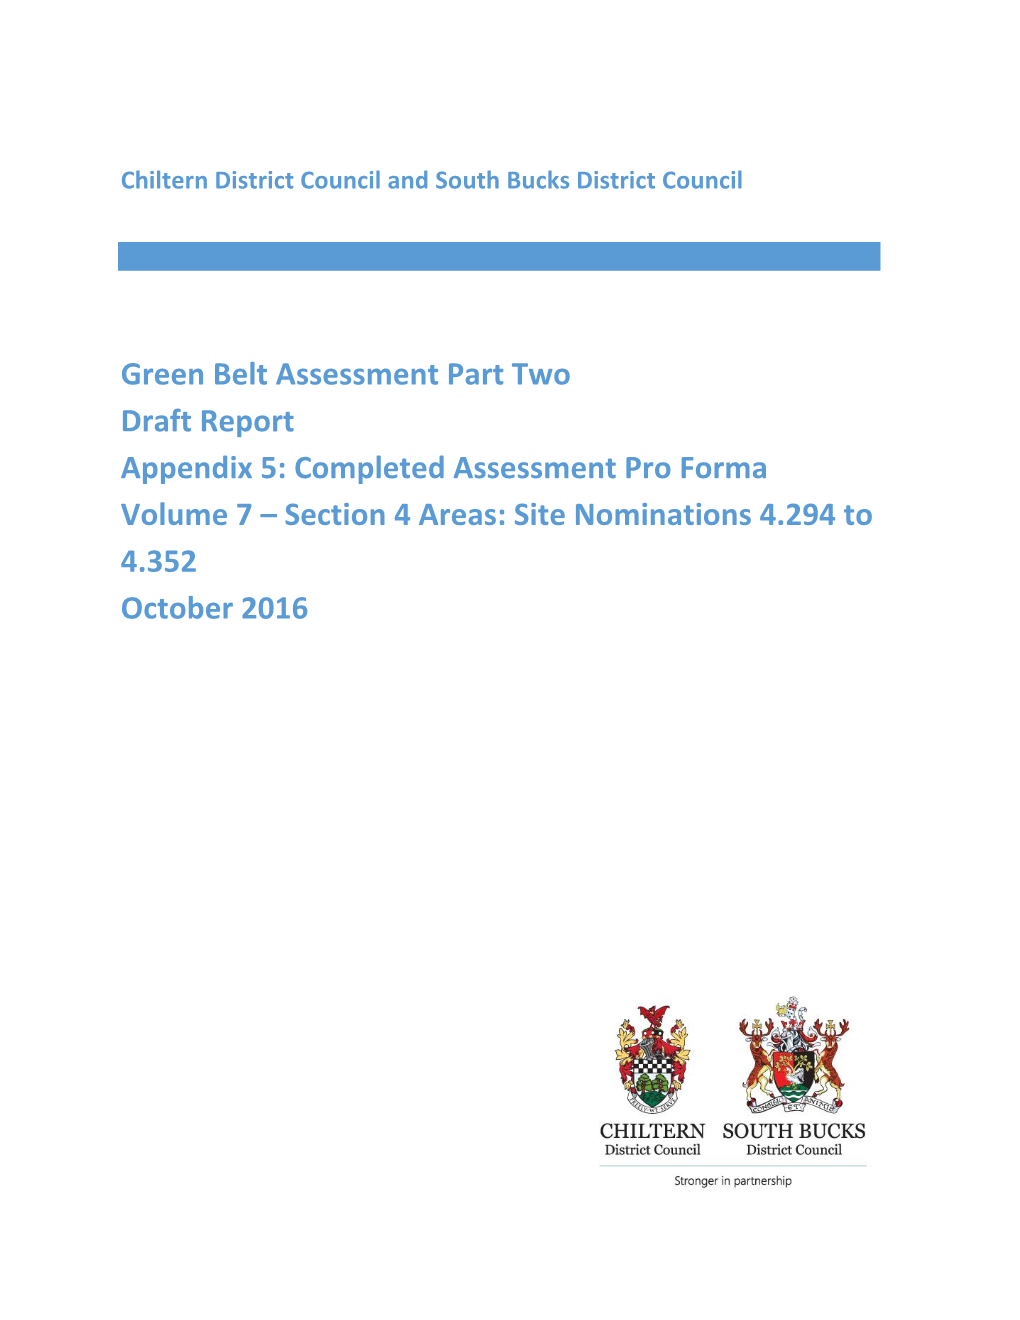 Green Belt Assessment Part Two Draft Report Appendix 5: Completed Assessment Pro Forma Volume 7 – Section 4 Areas: Site Nominations 4.294 to 4.352